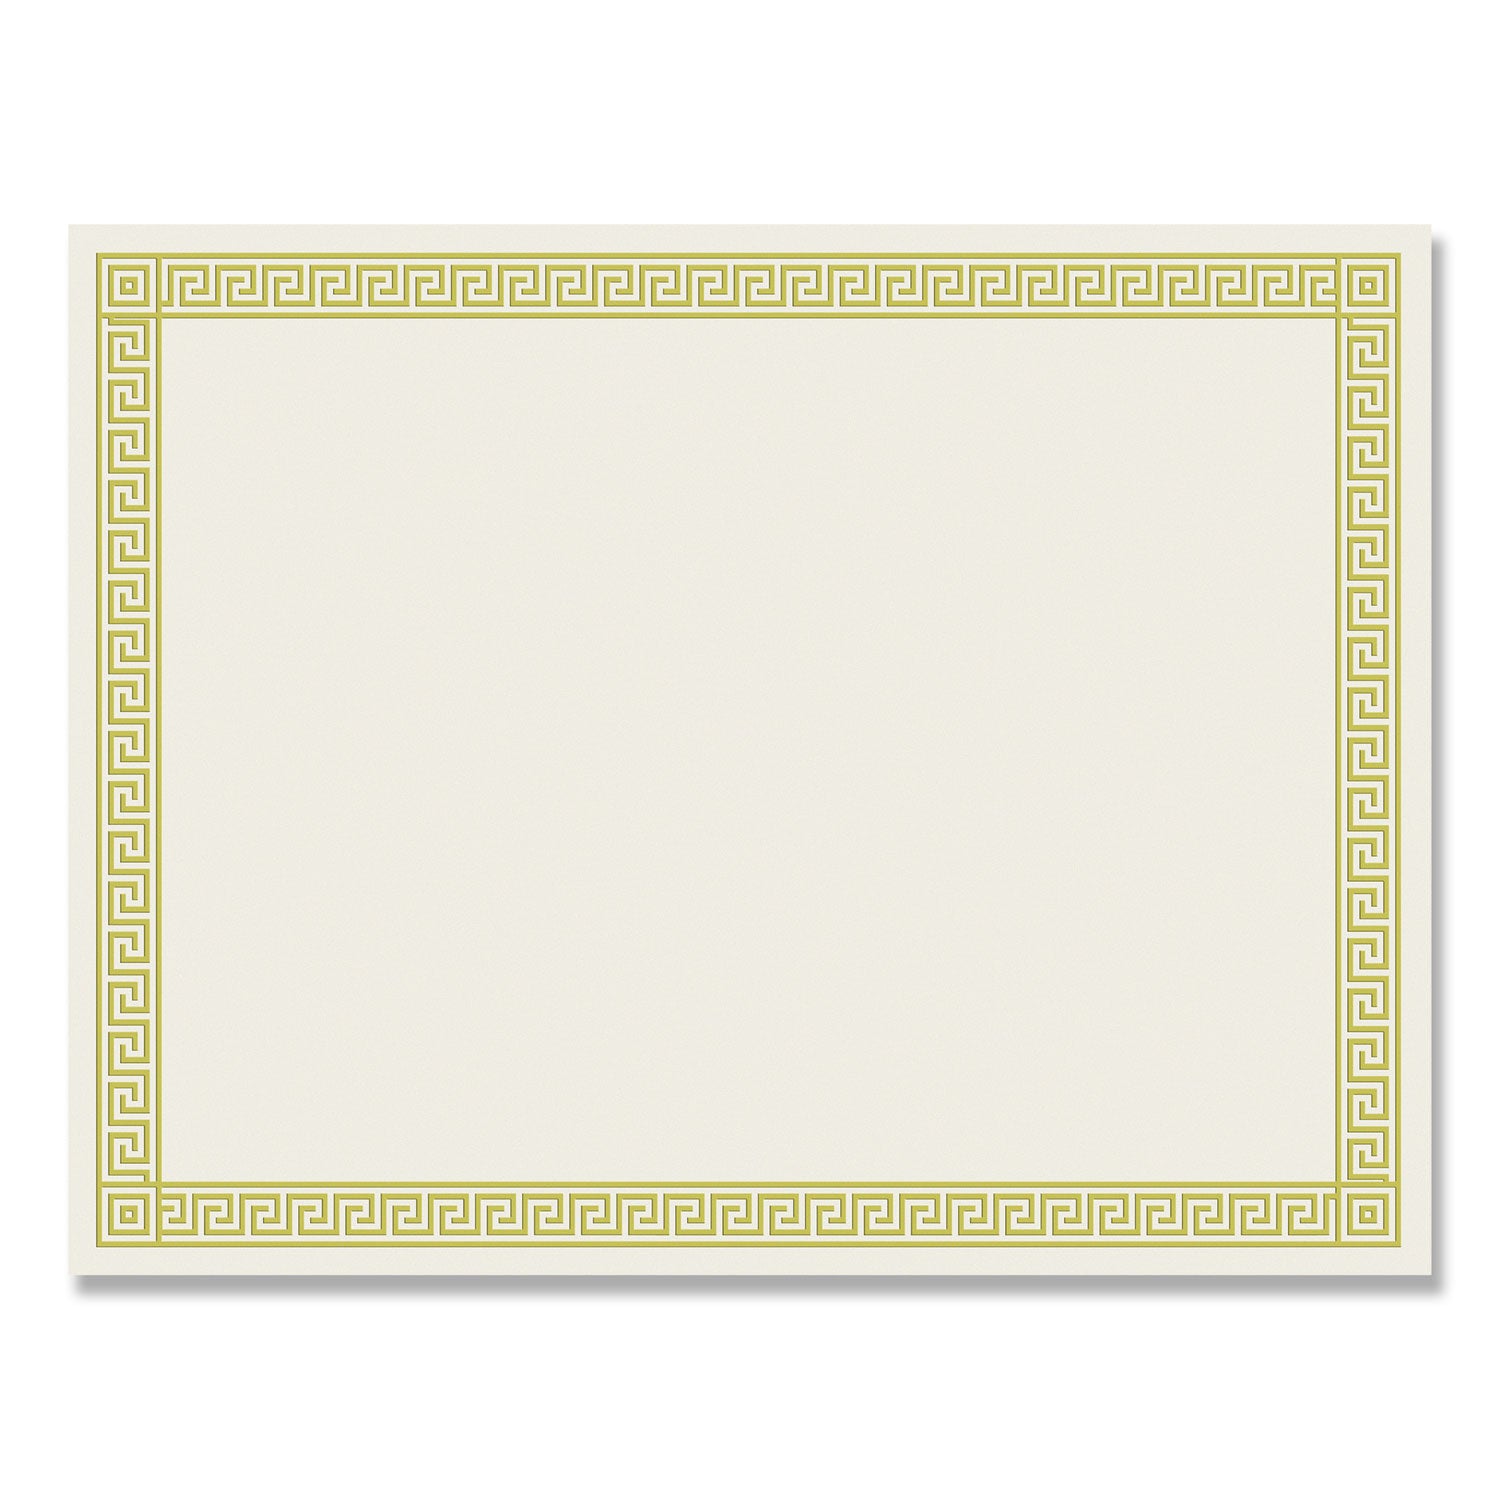 foil-border-certificates-85-x-11-ivory-gold-with-channel-gold-border-12-pack_cos963070 - 1